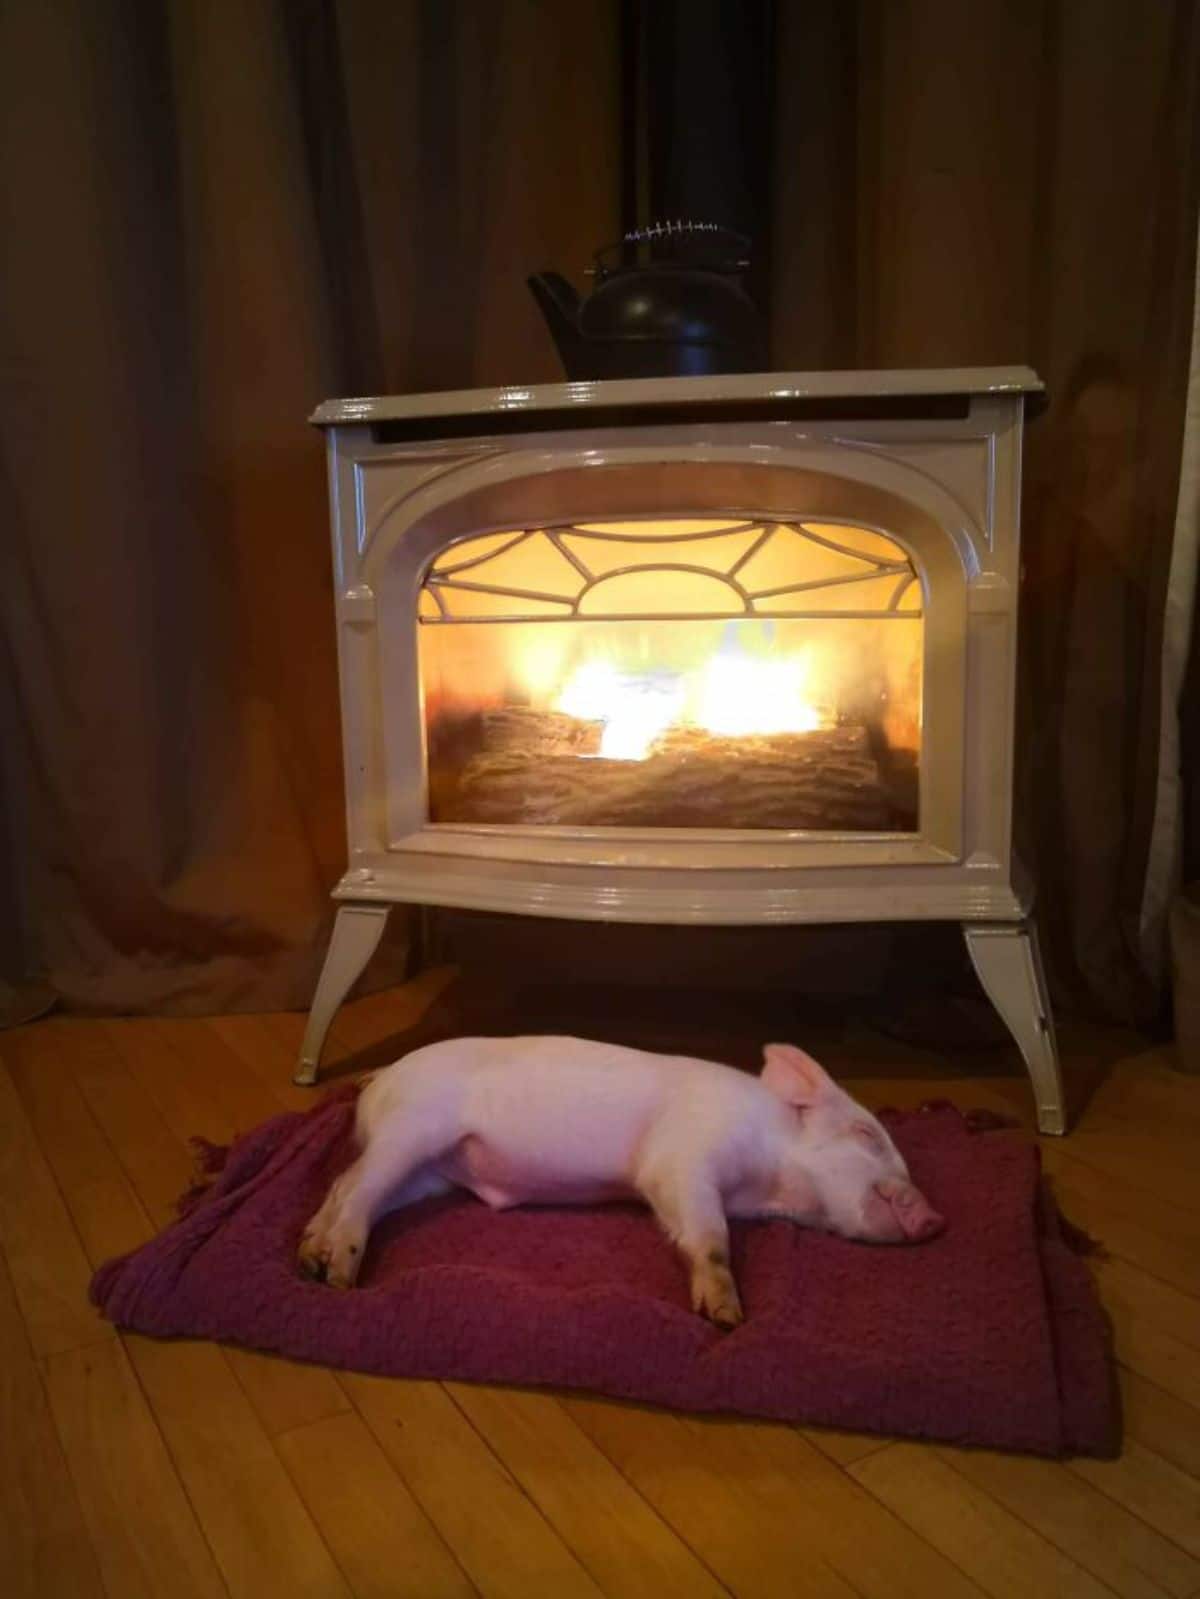 pink piglet sleeping on its side on a red blanket in front of a fire